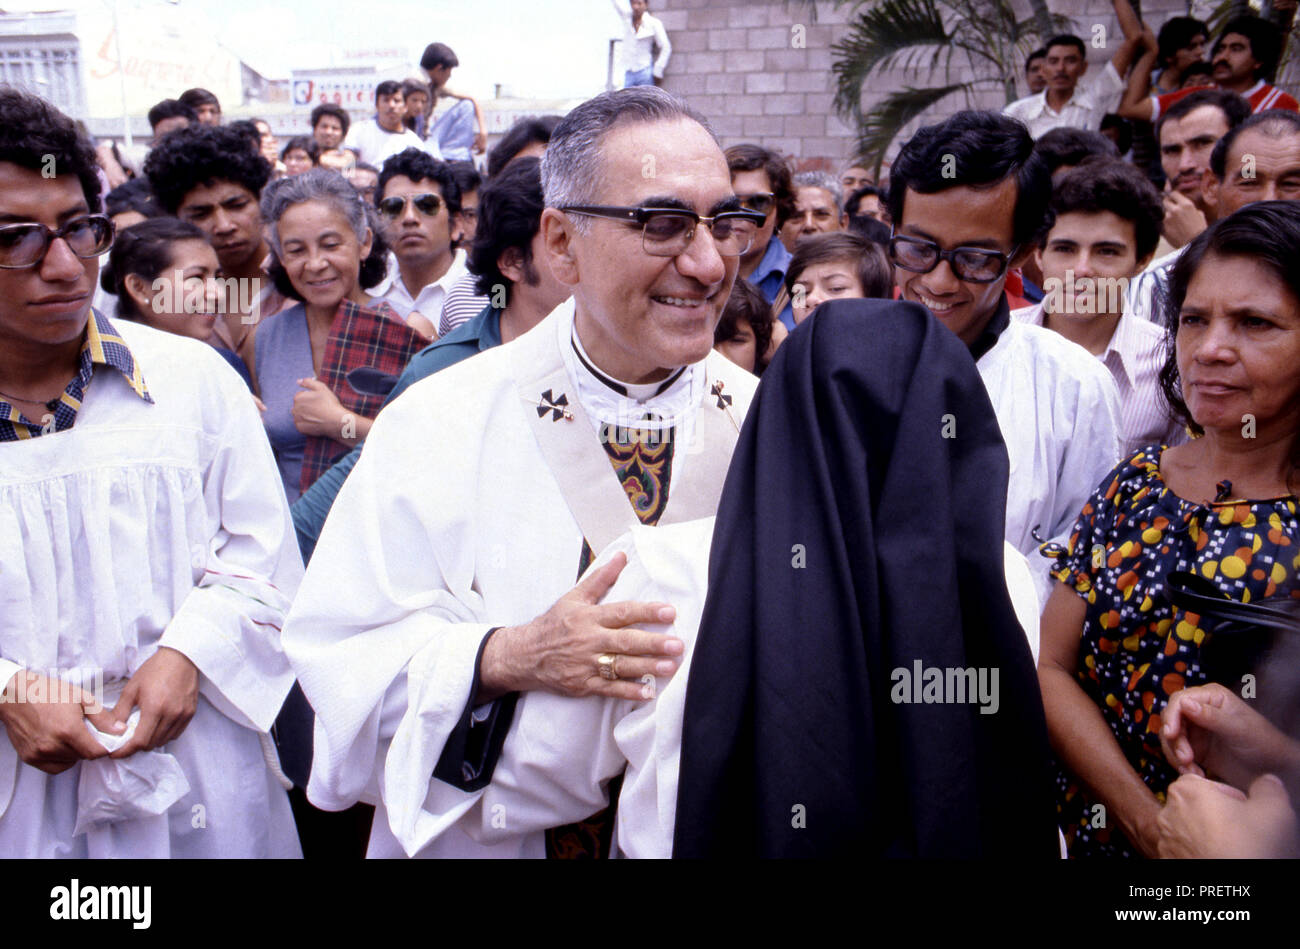 The martyr Archbishop Oscar Romero of El Salvador is greeted by an Catholic nun and several hundred of the faithful after a mass at Iglesia el Rosario -the Church of the Rosary - in San Salvador, El Salvador. The priest was later slain at the alter by a right wing gunman in 1980. Oscar Arnulfo Romero y Galdamez was a bishop of the Catholic Church in El Salvador. He became the fourth Archbishop of San Salvador, succeeding Luis Chavez, and spoke out against poverty, social injustice, assassinations and torture. Romero was assassinated while offering Mass on March 24,1980. Stock Photo